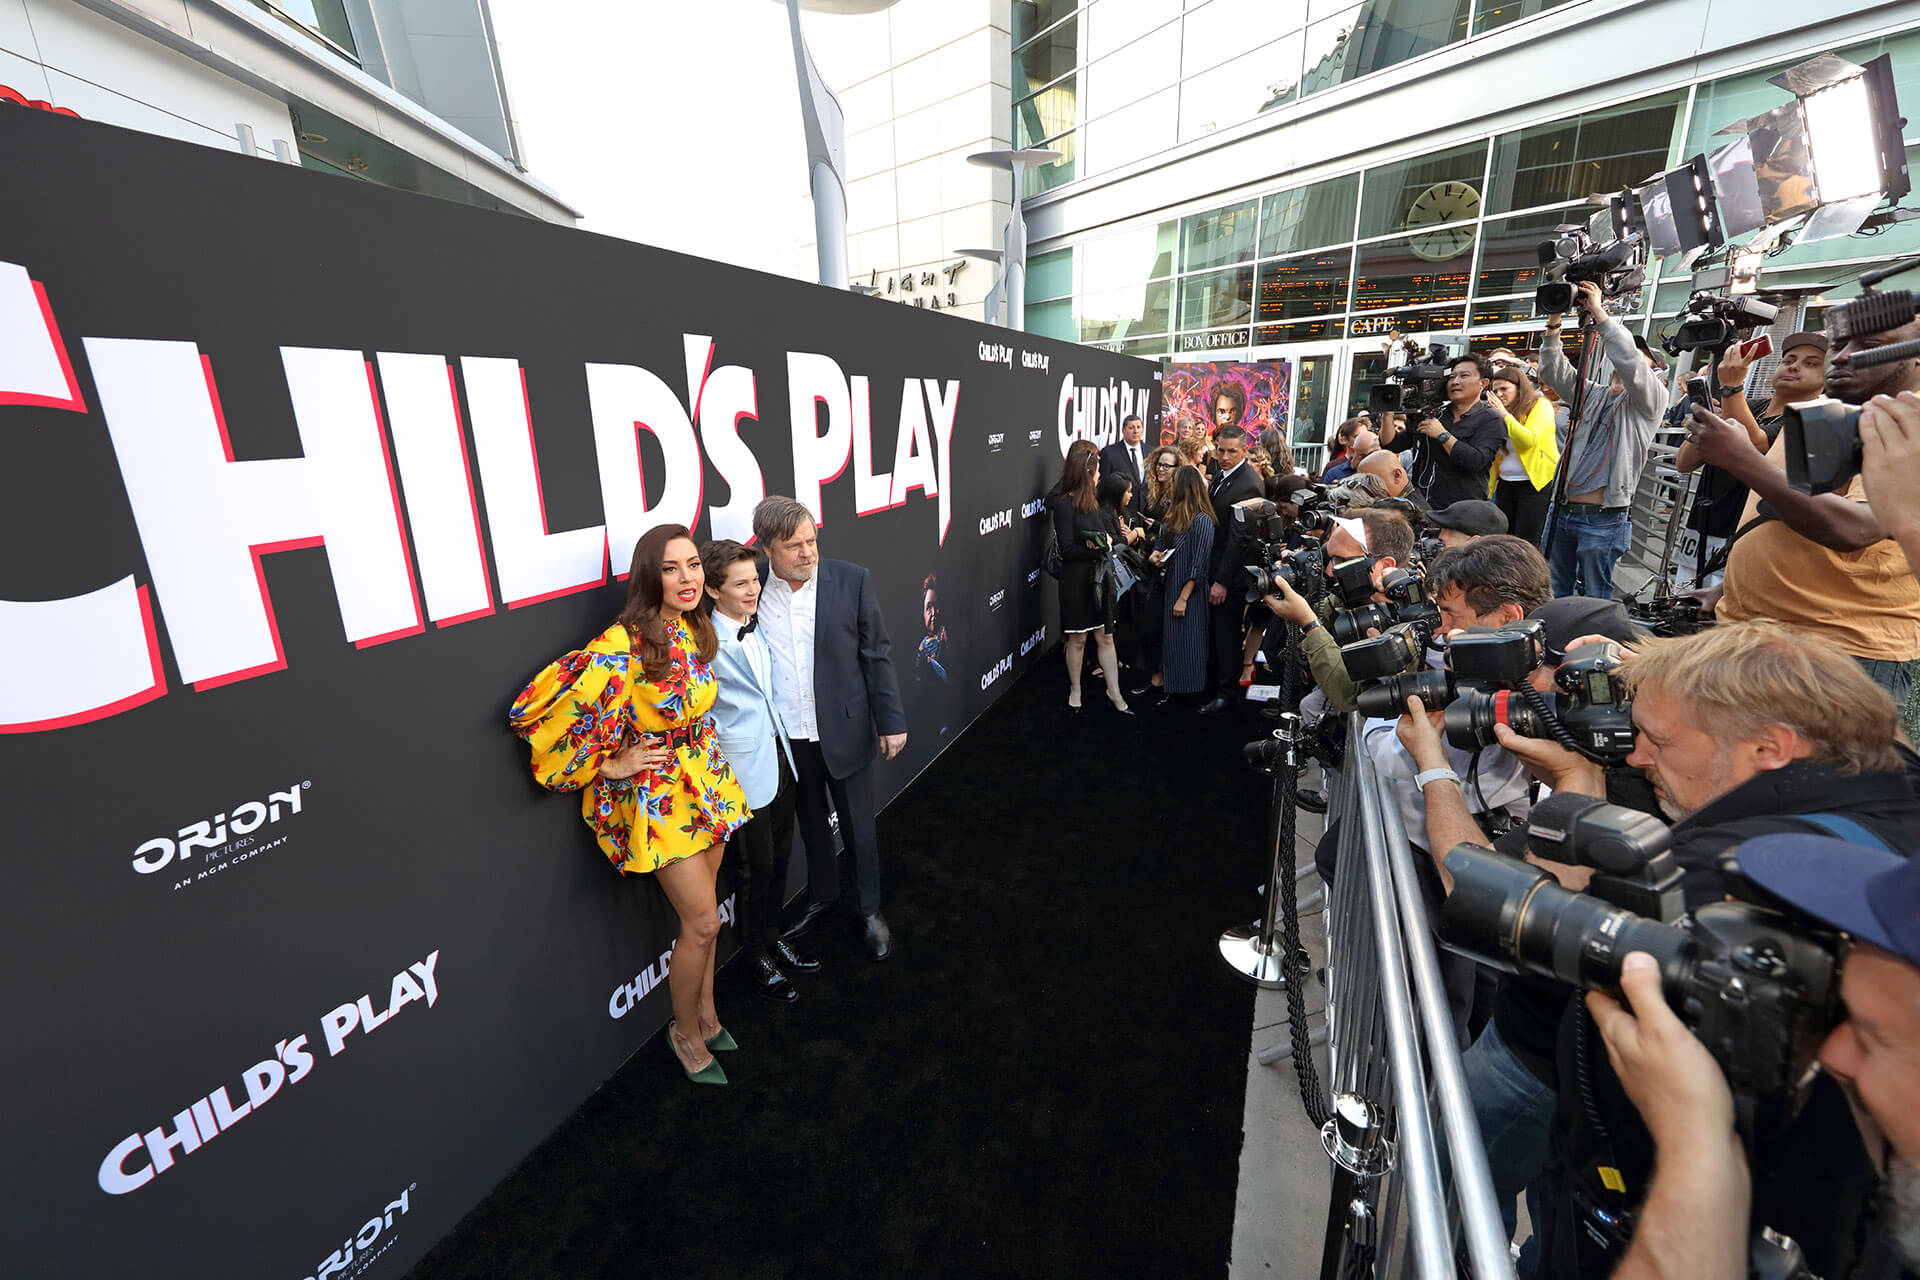 Child's Play Movie Premiere Los Angeles JG2 Collective